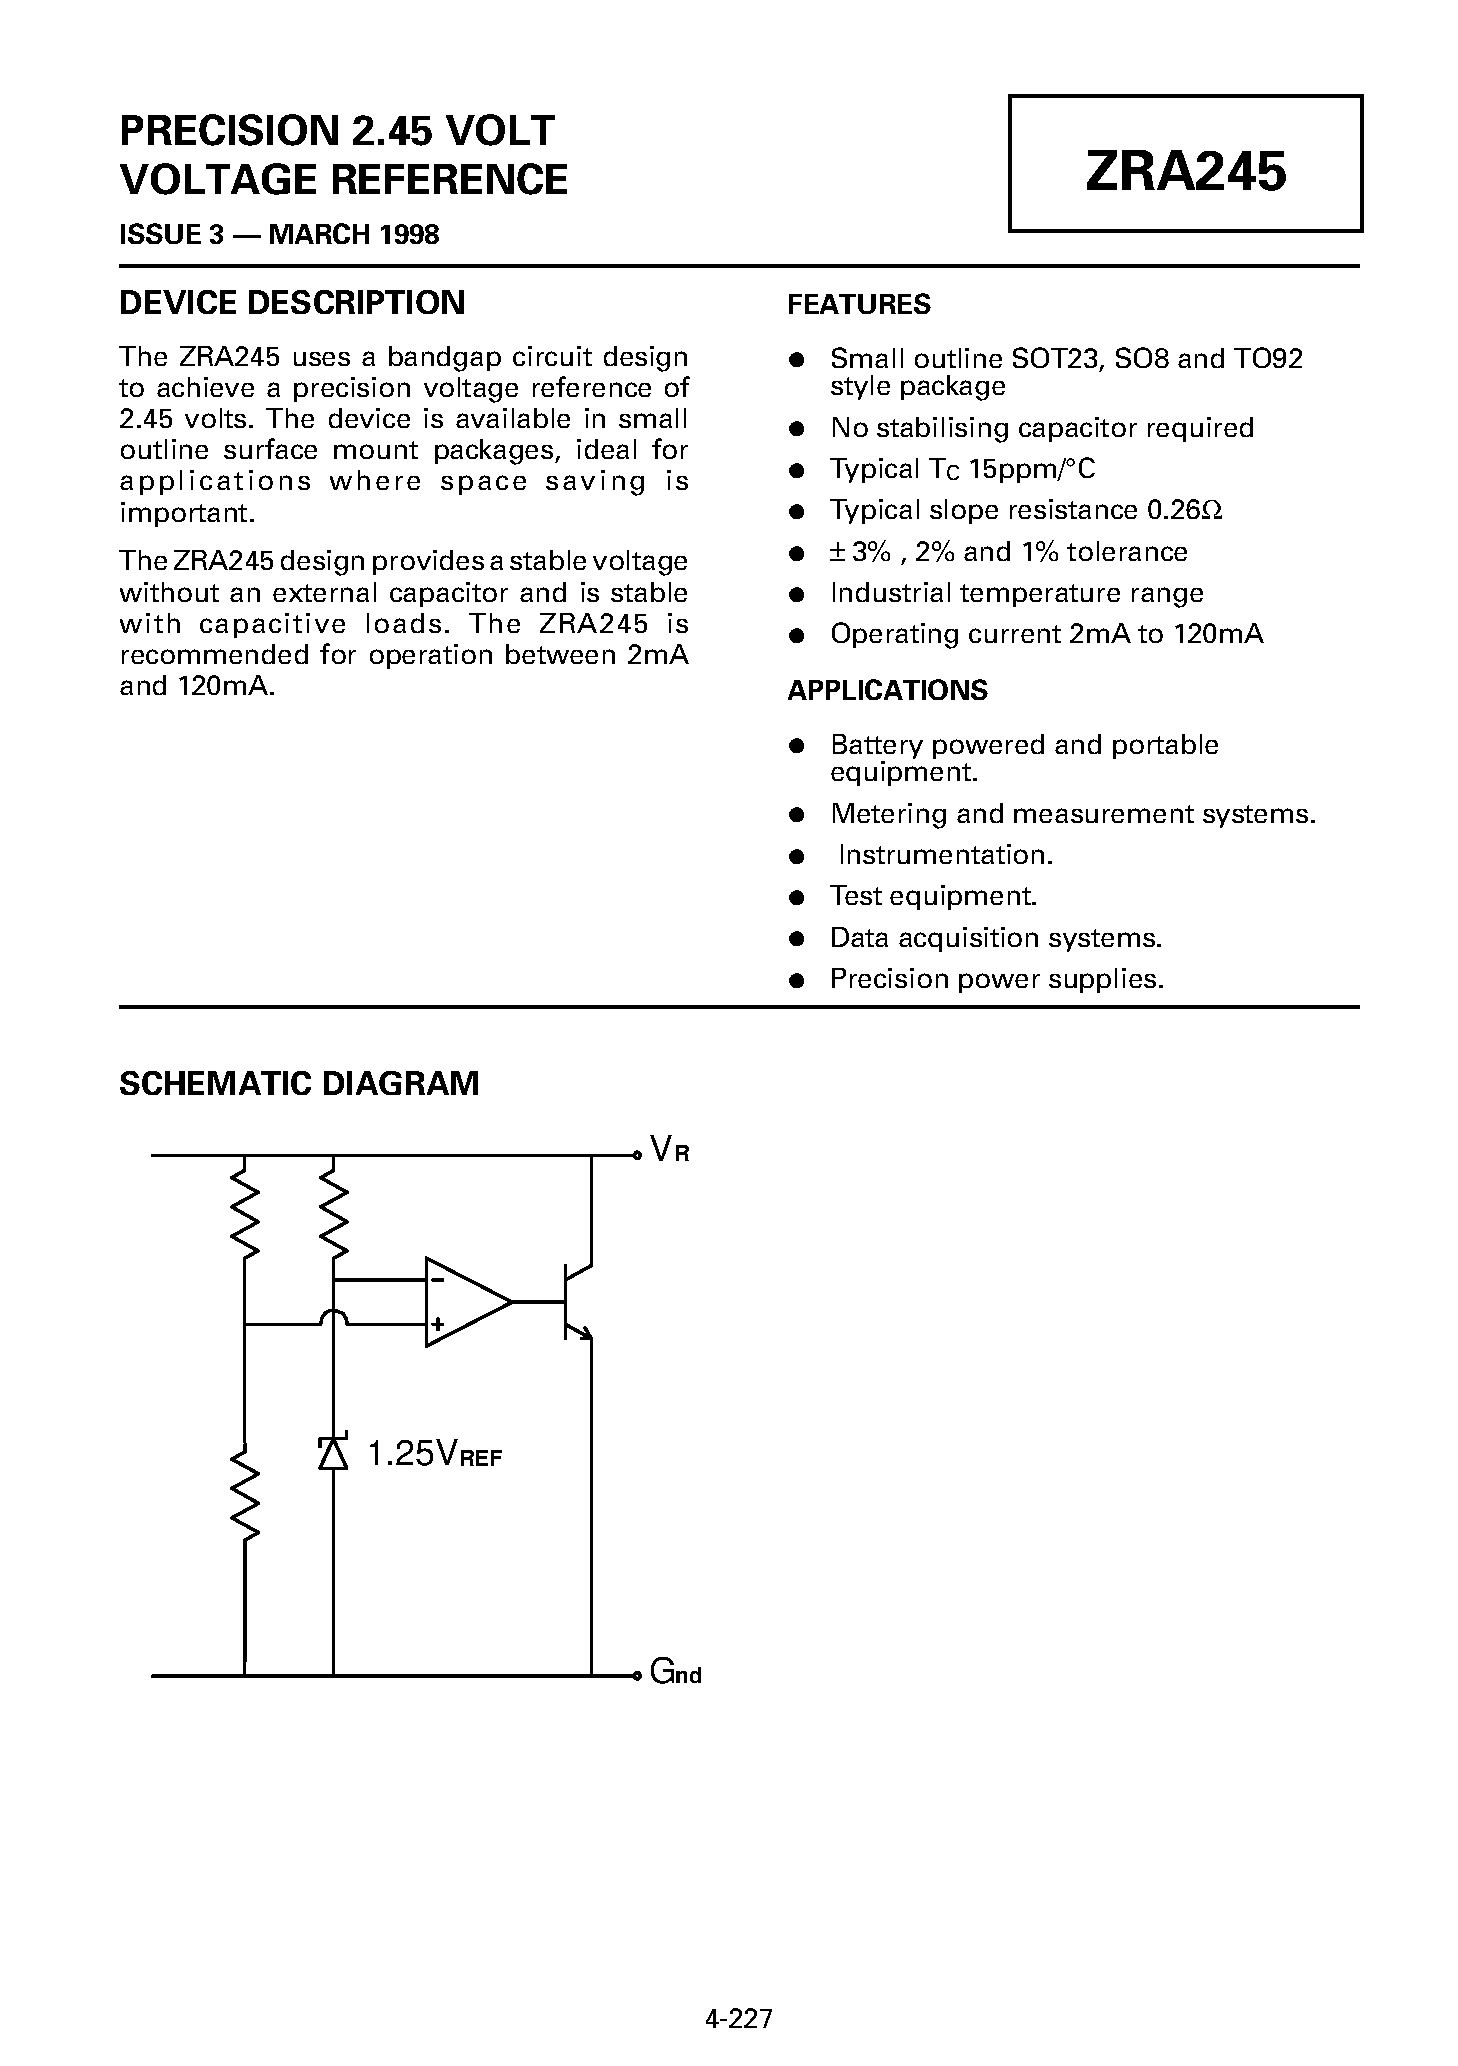 Datasheet ZRA245A03 - PRECISION 2.45 VOLT VOLTAGE REFERENCE page 1